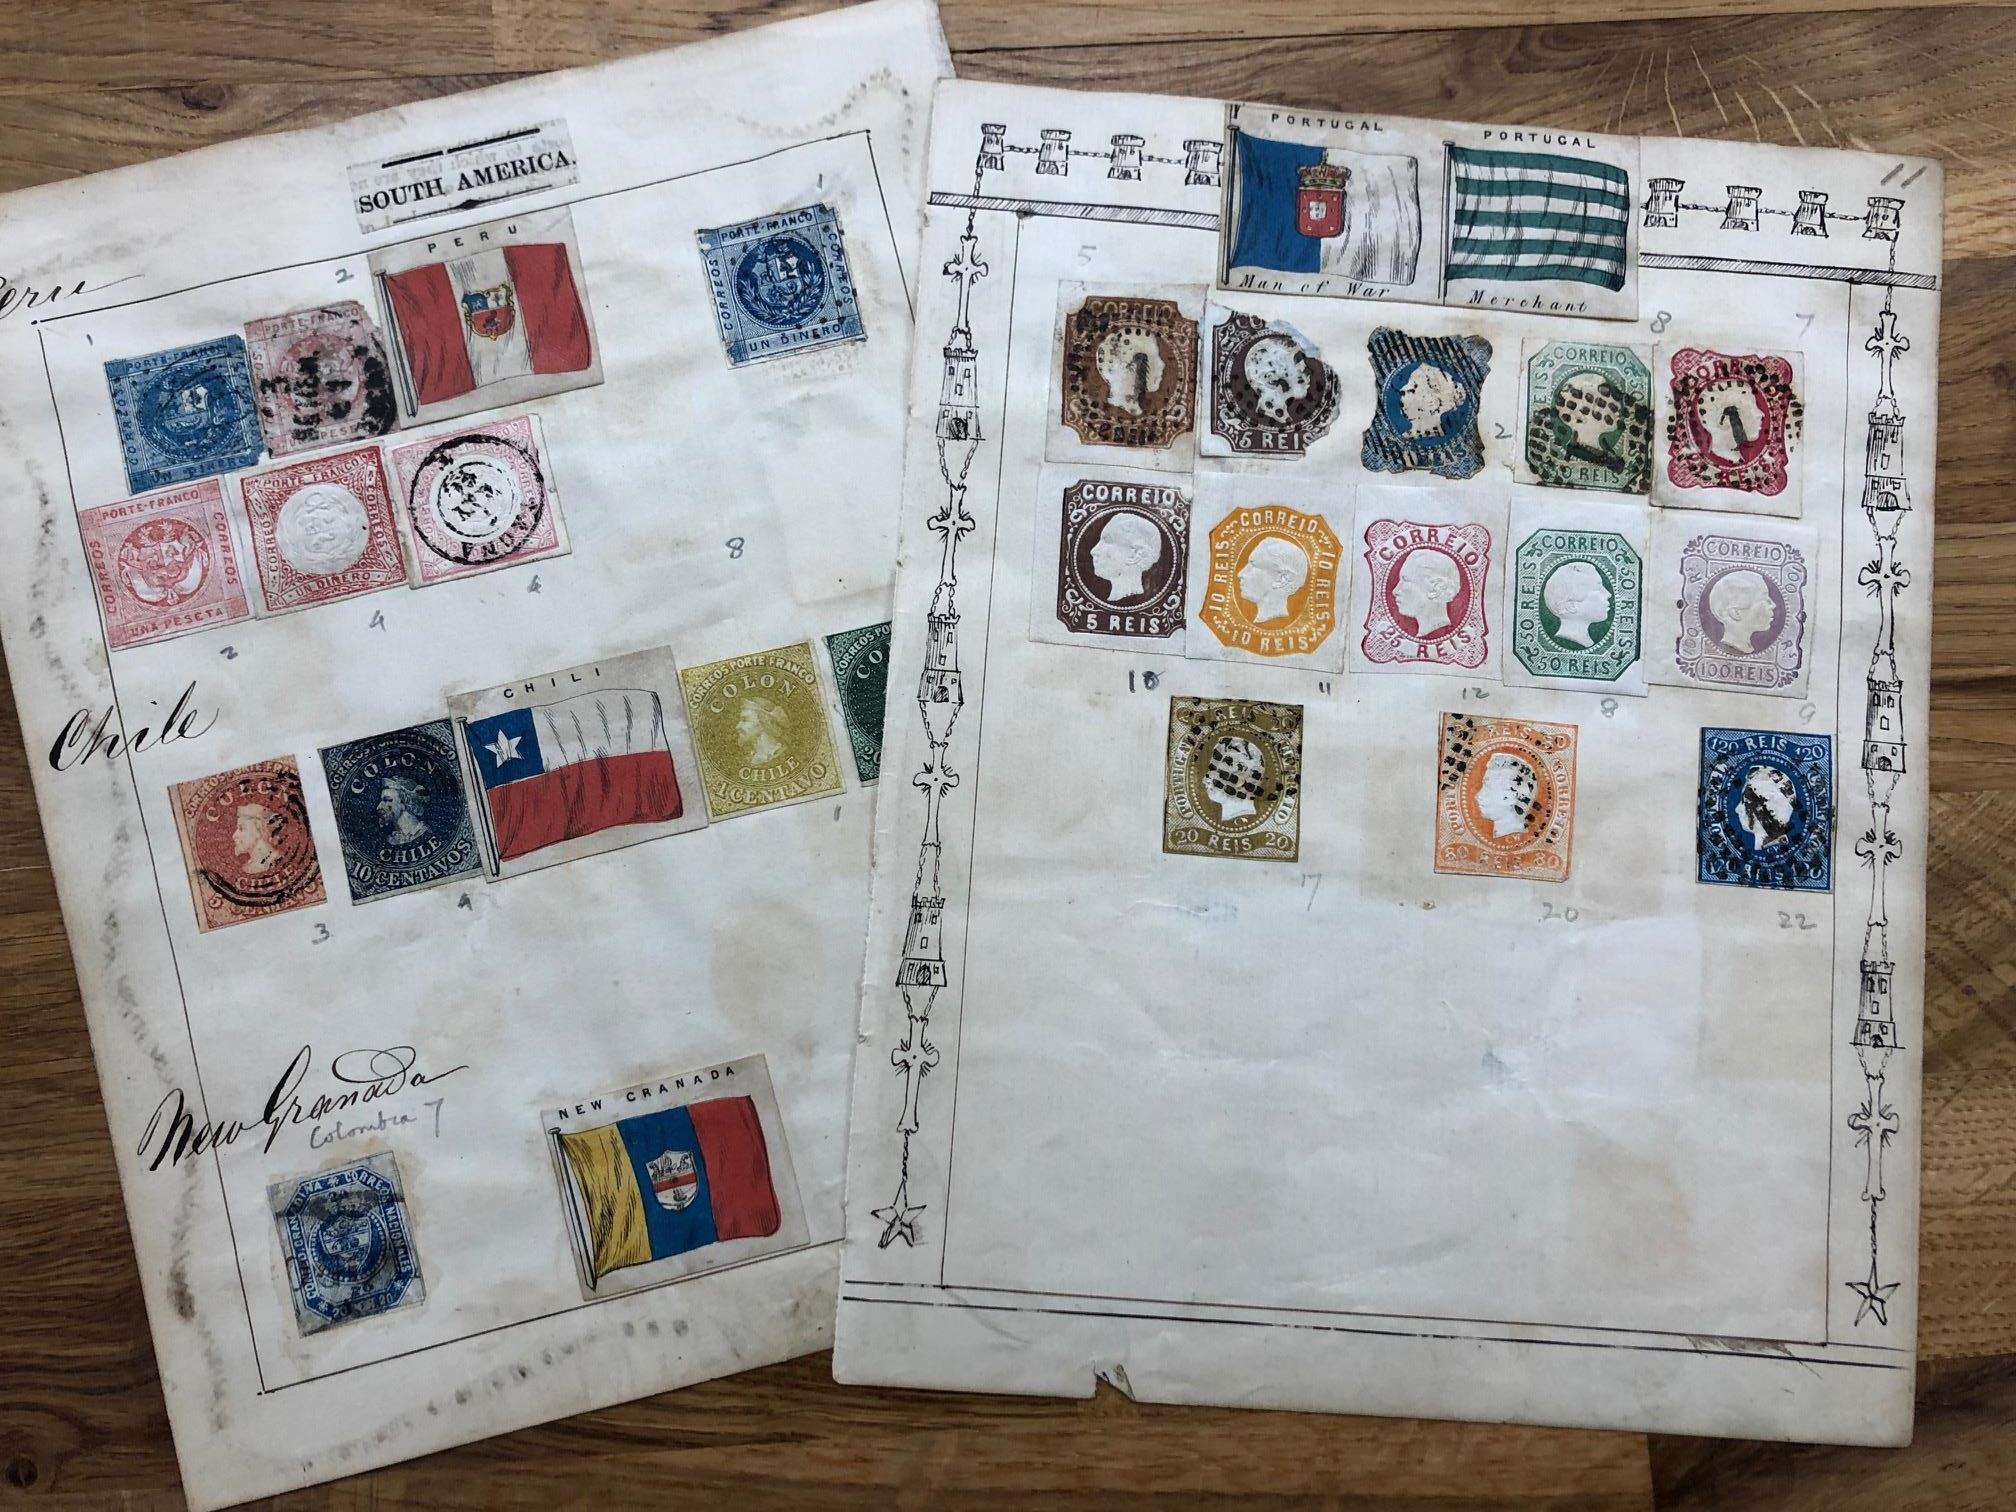 TWO VERY OLD stamp pages containing early issues from Spain, Portugal and South America, some very